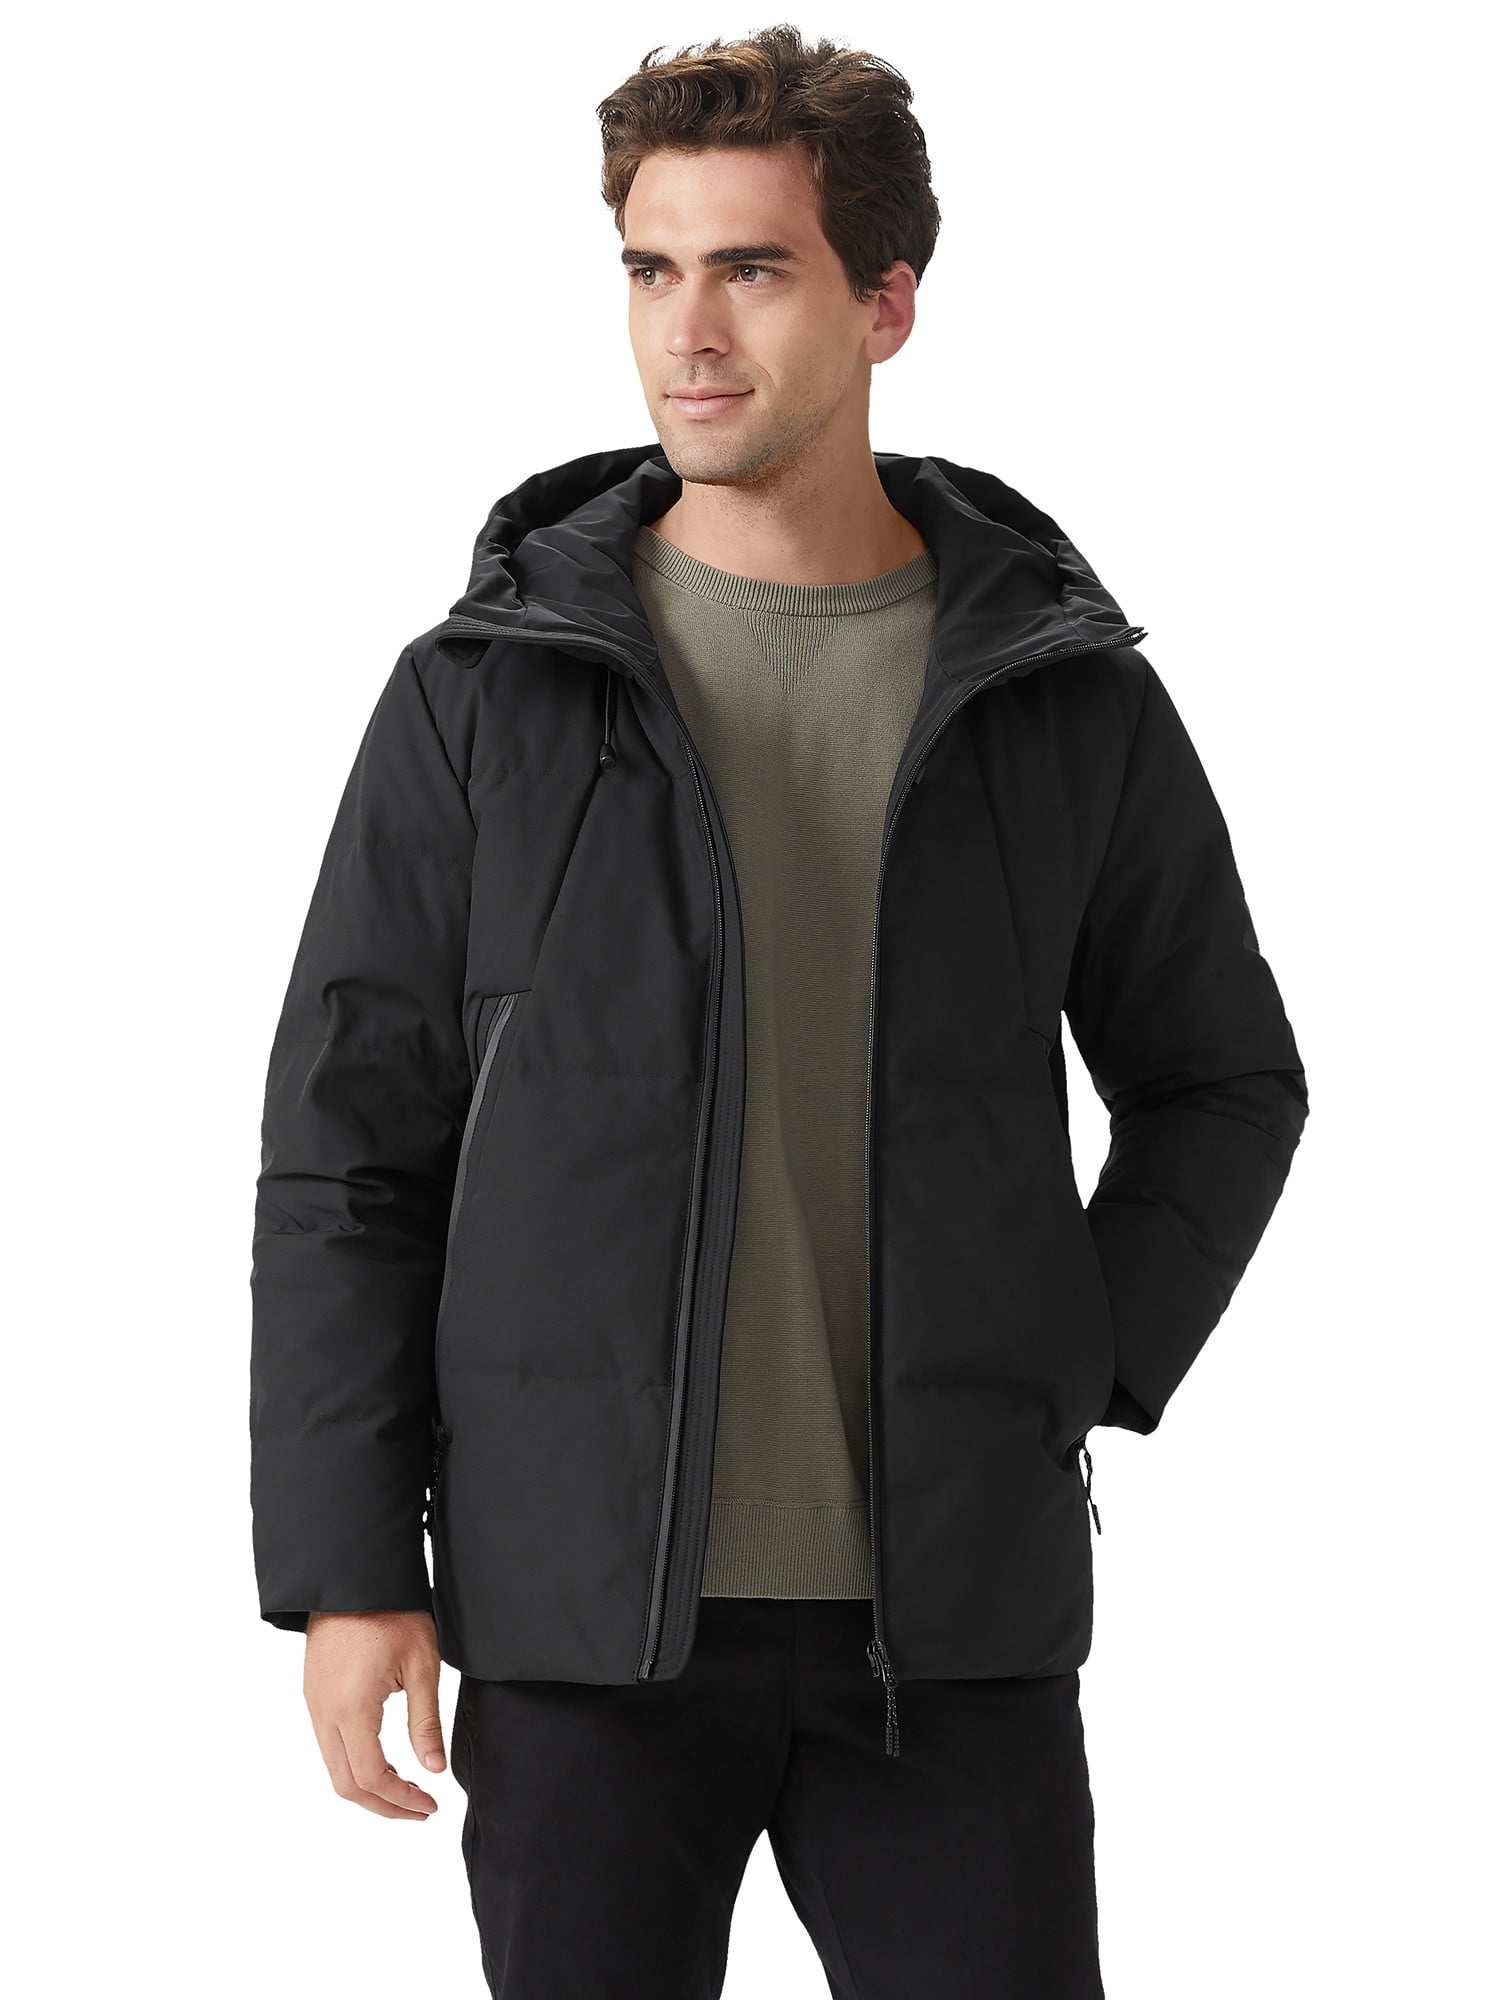 Orolay Men's Puffer Down Jacket Insulated Warm Hooded Winter Coat ...